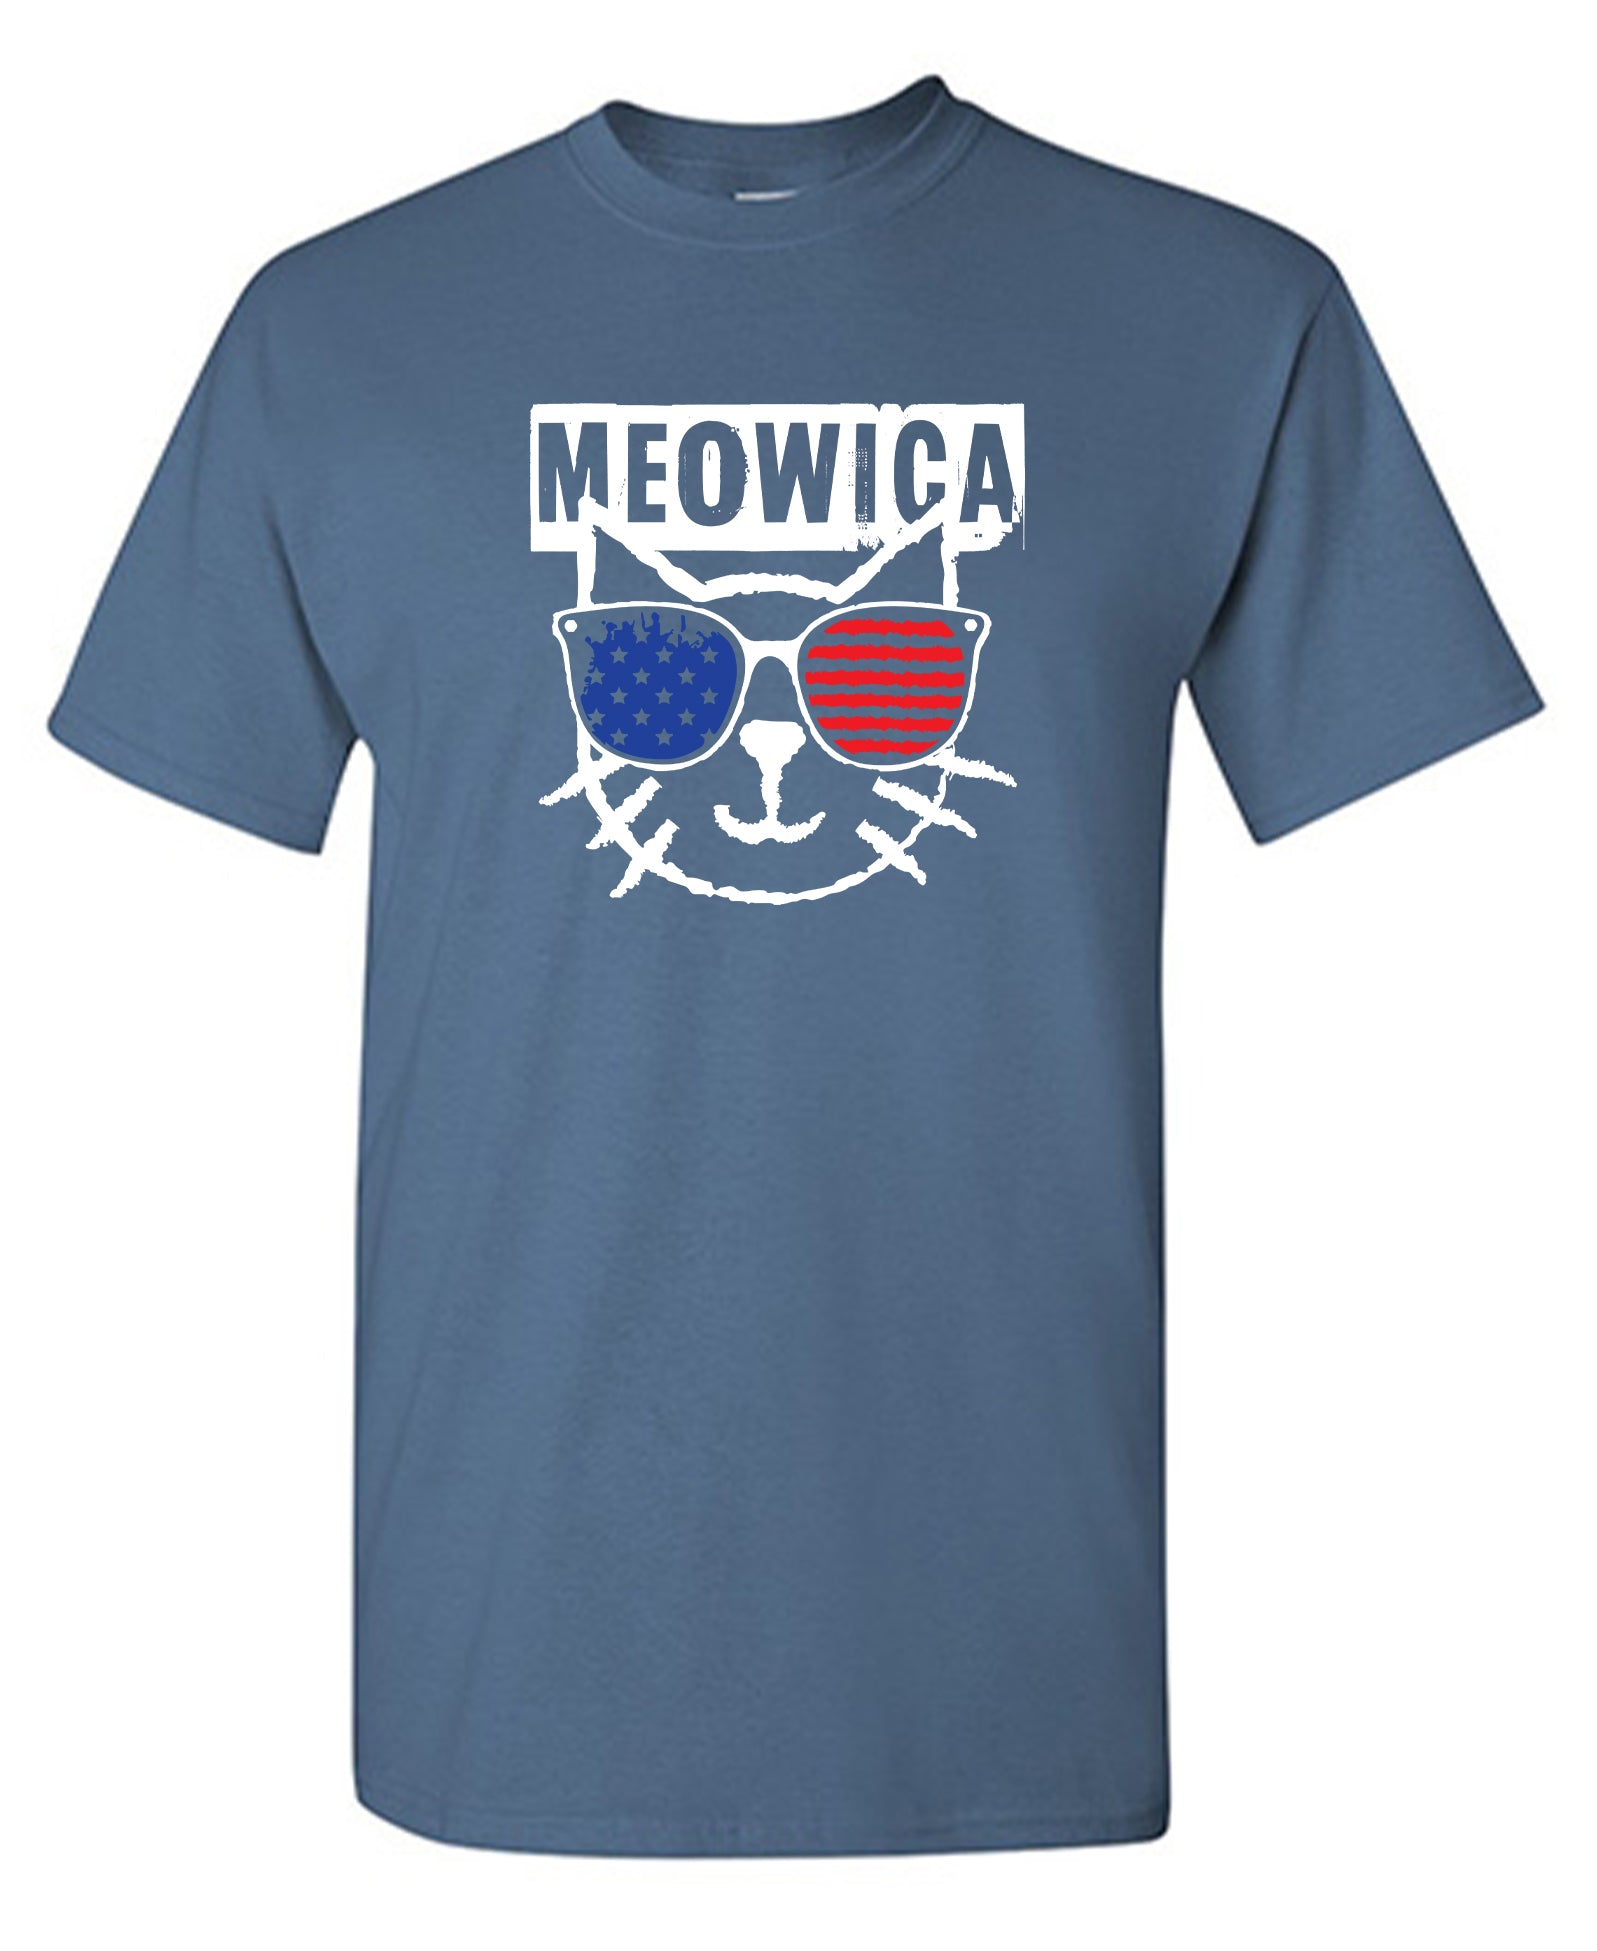 Meowica,  4th of Jly Shirt - Funny T Shirts & Graphic Tees